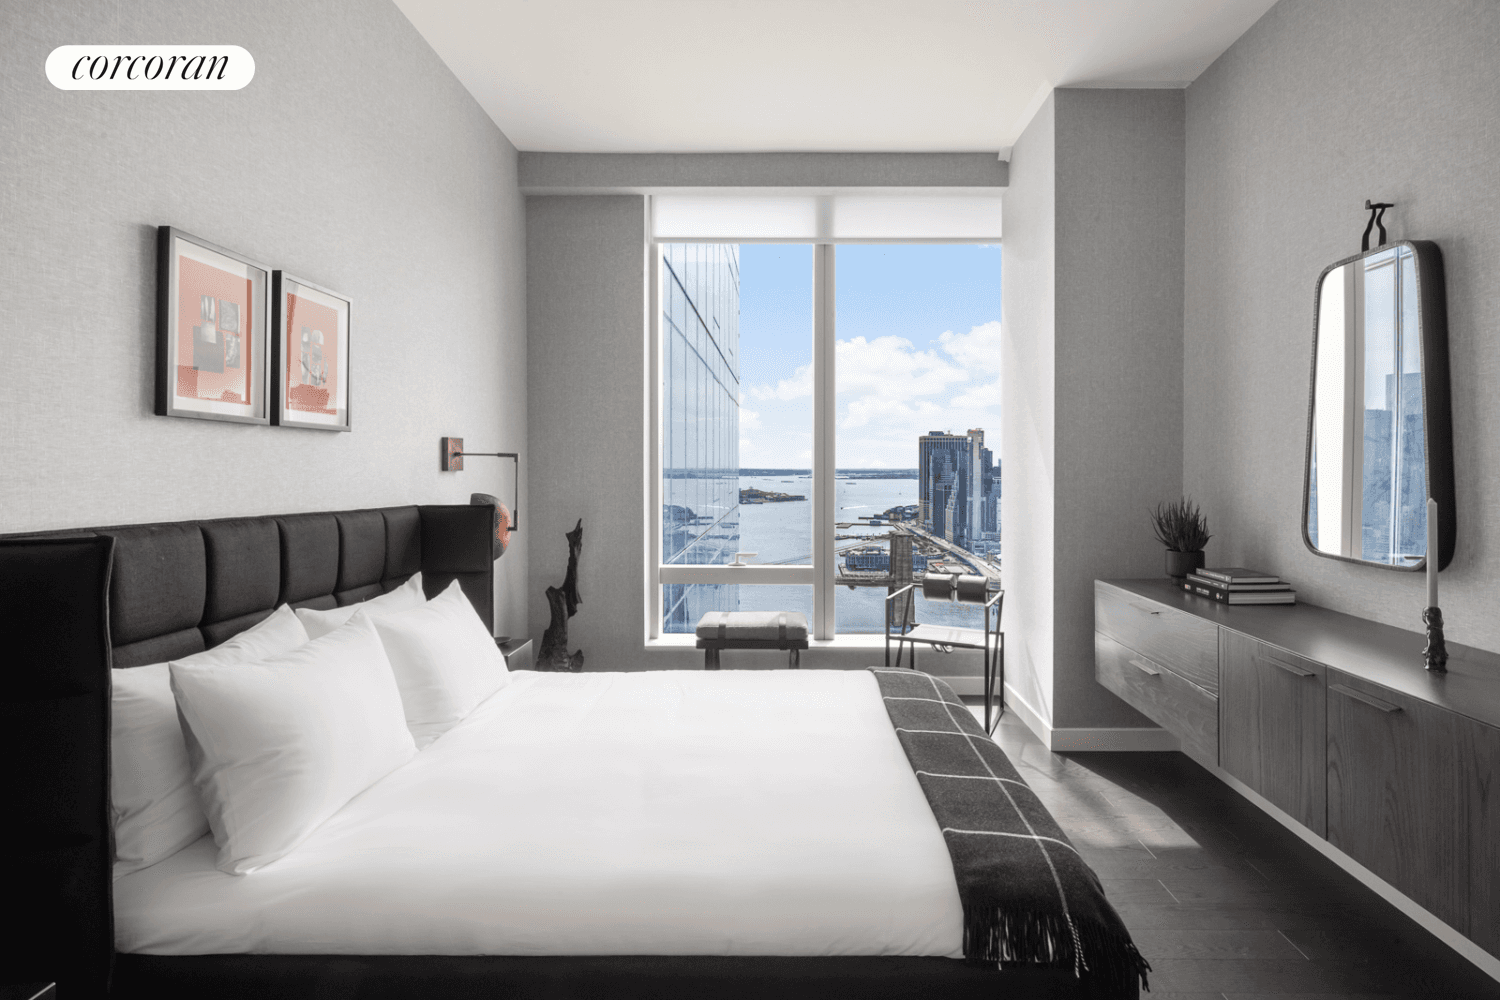 ONE MANHATTAN SQUARE OFFERS ONE OF THE LAST 20 YEAR TAX ABATEMENTS AVAILABLE IN NEW YORK CITYResidence 49N is a 723 square foot one bedroom, one bathroom with an open ...